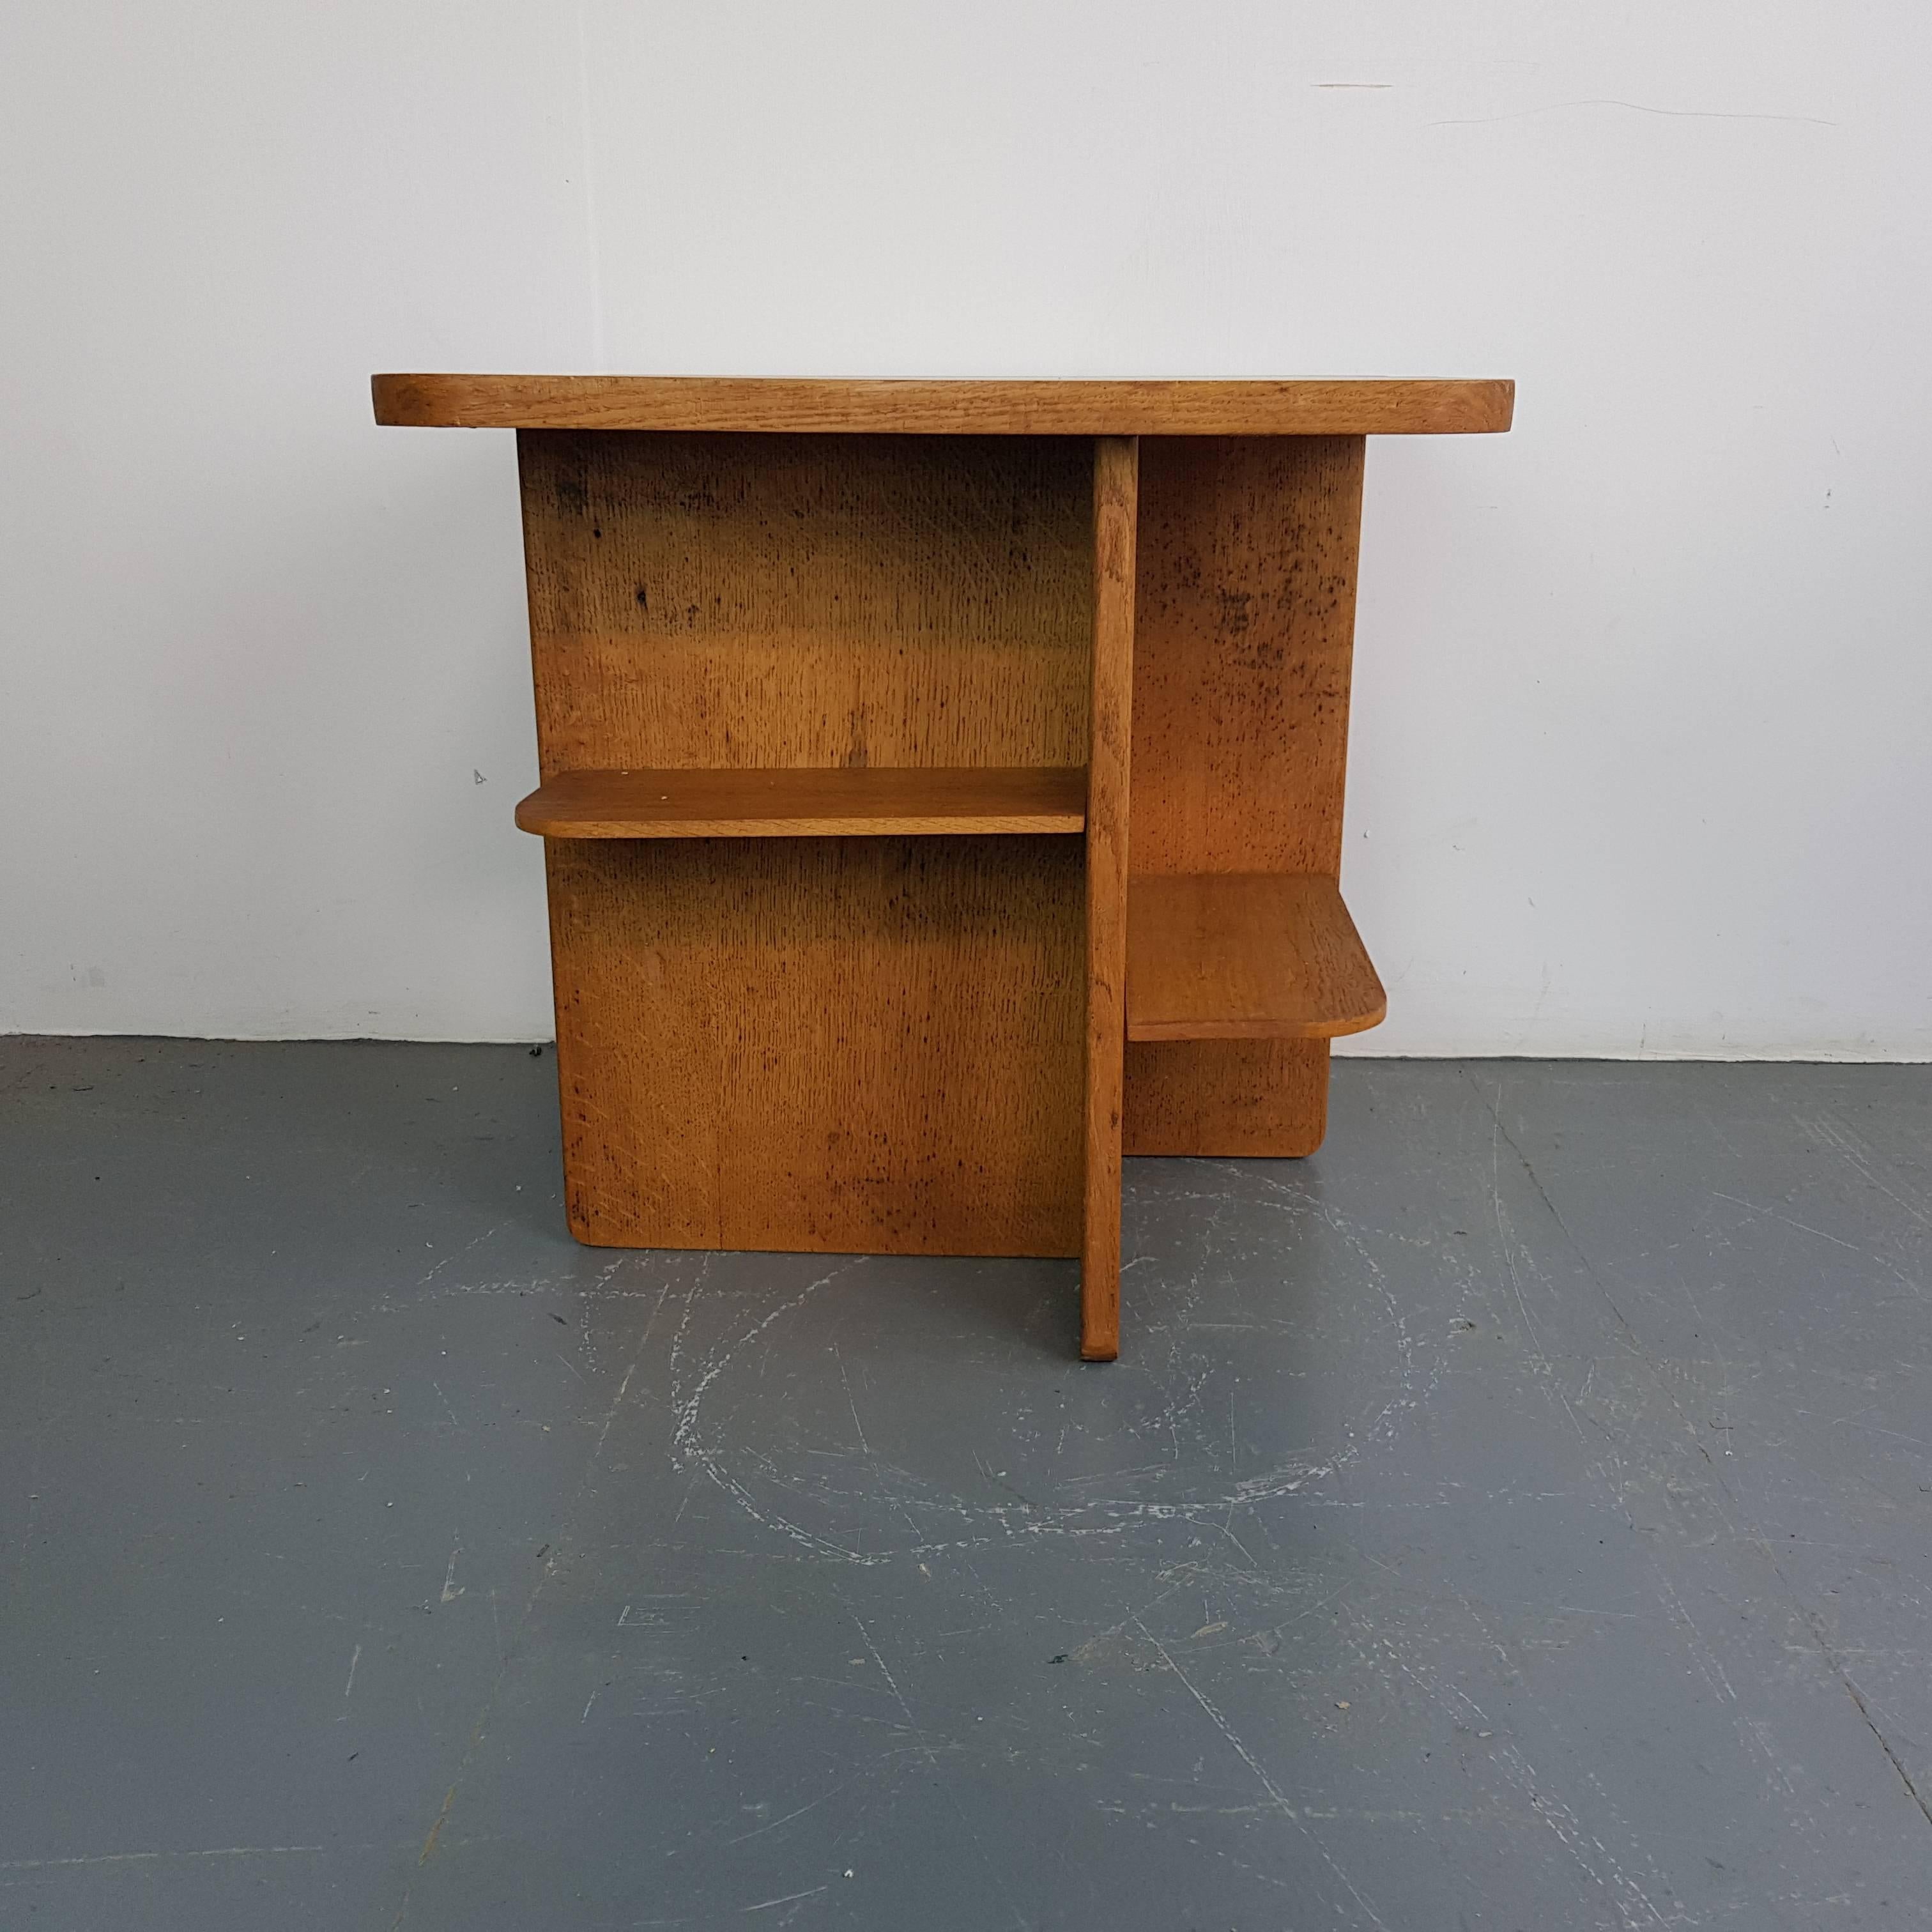 Midcentury Square Oak Coffee Table In Good Condition For Sale In Lewes, East Sussex